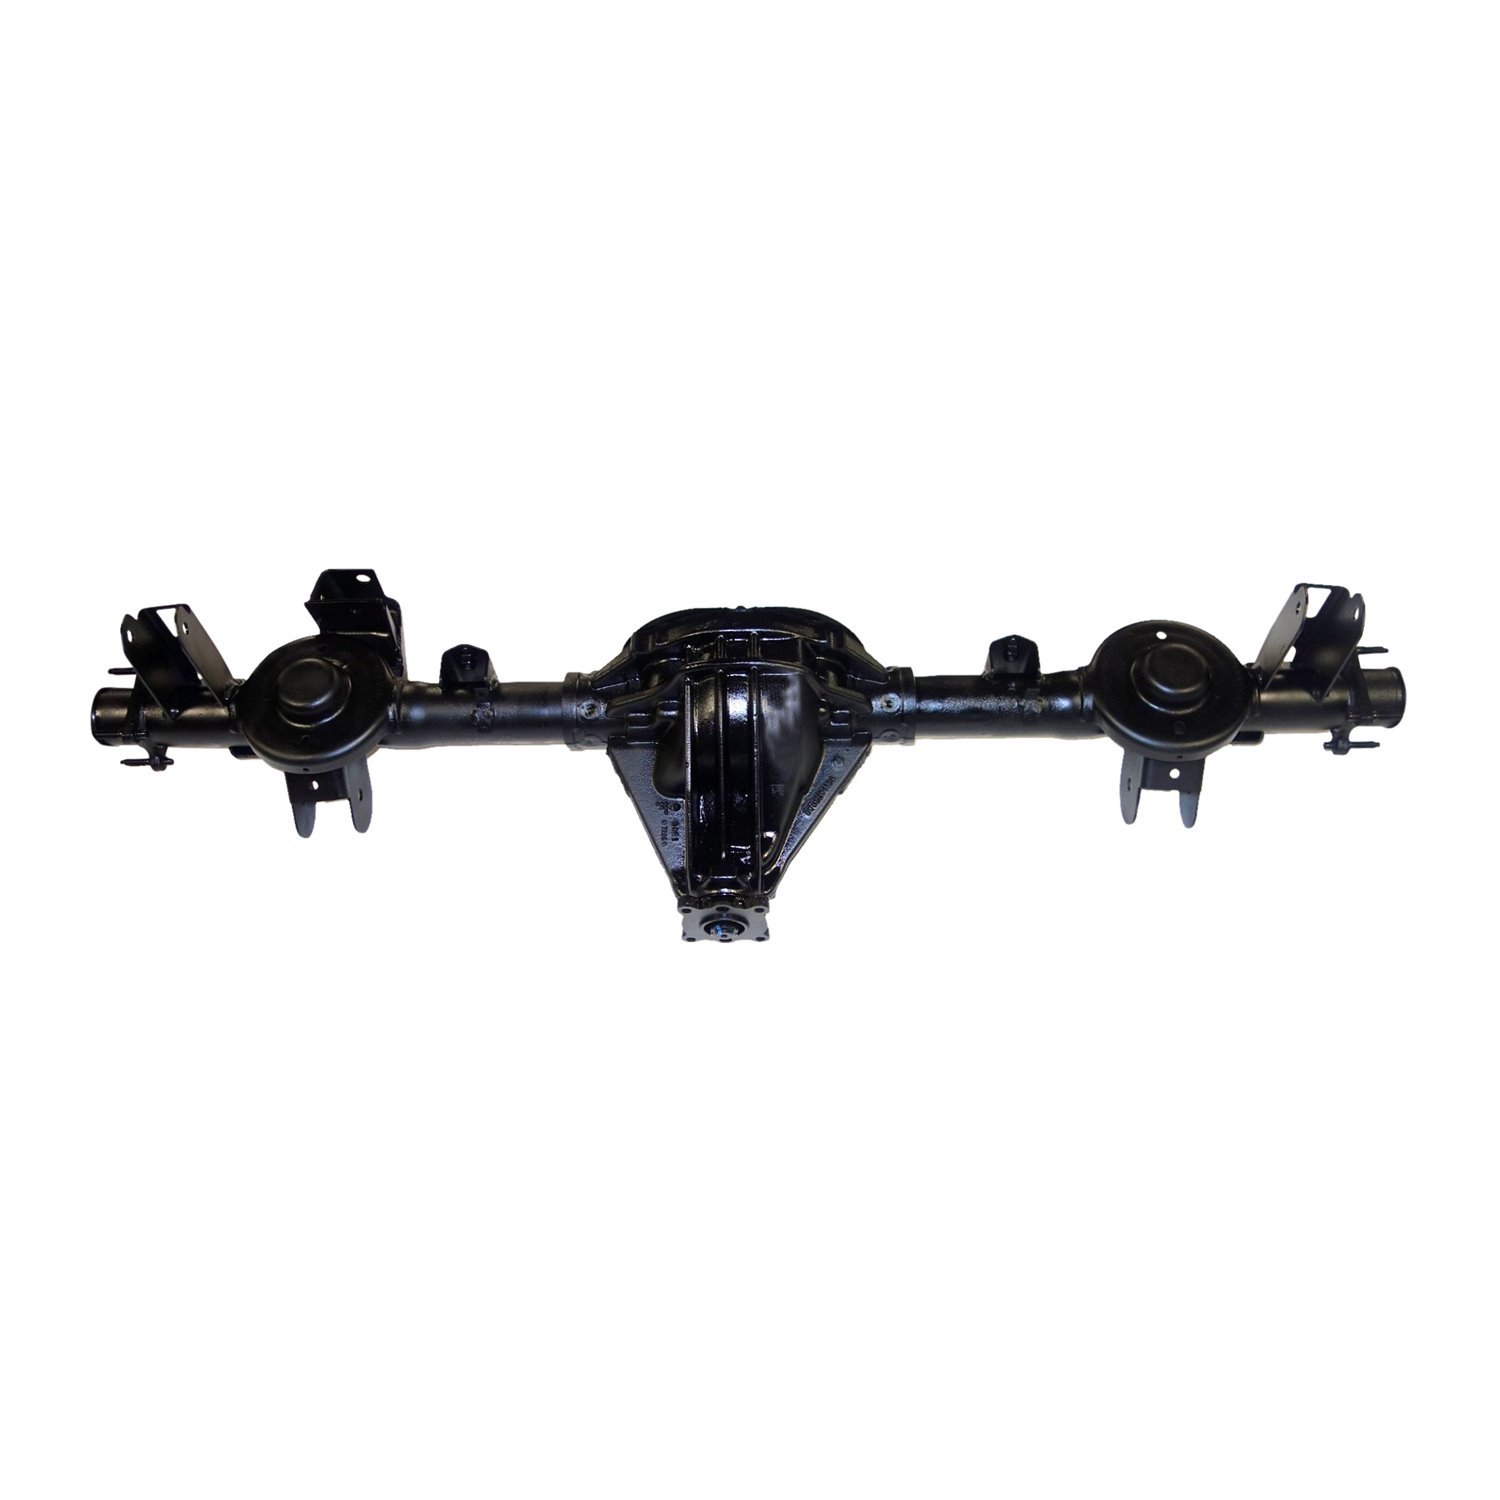 Remanufactured Axle Assembly for Chy 8.25" 07-12 Nitro & Liberty 3.73 Ratio, Open